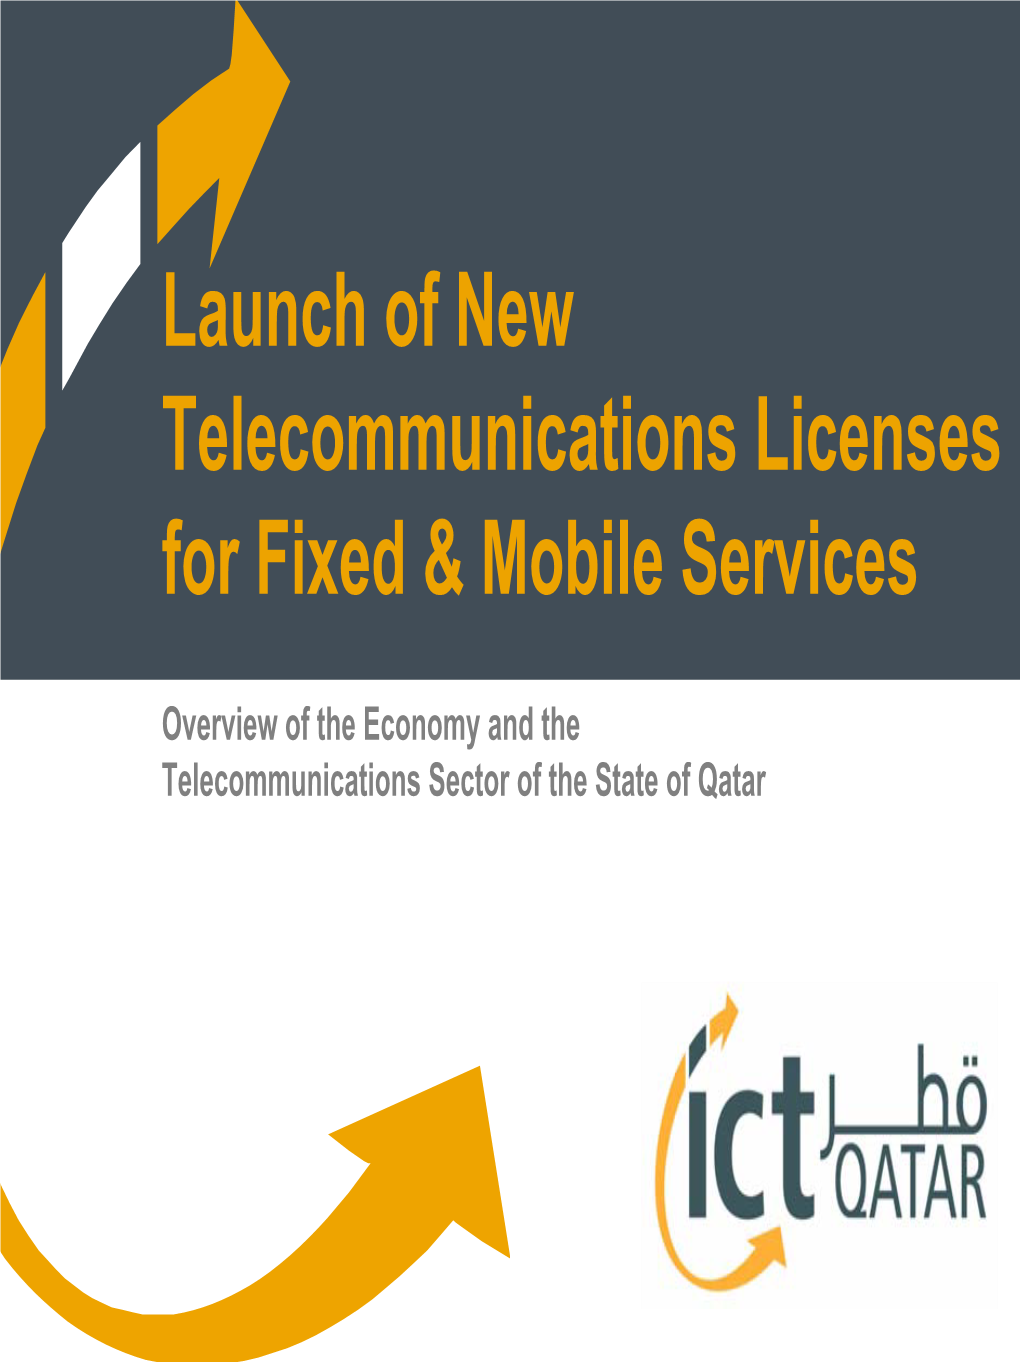 Launch of New Telecommunications Licenses for Fixed & Mobile Services